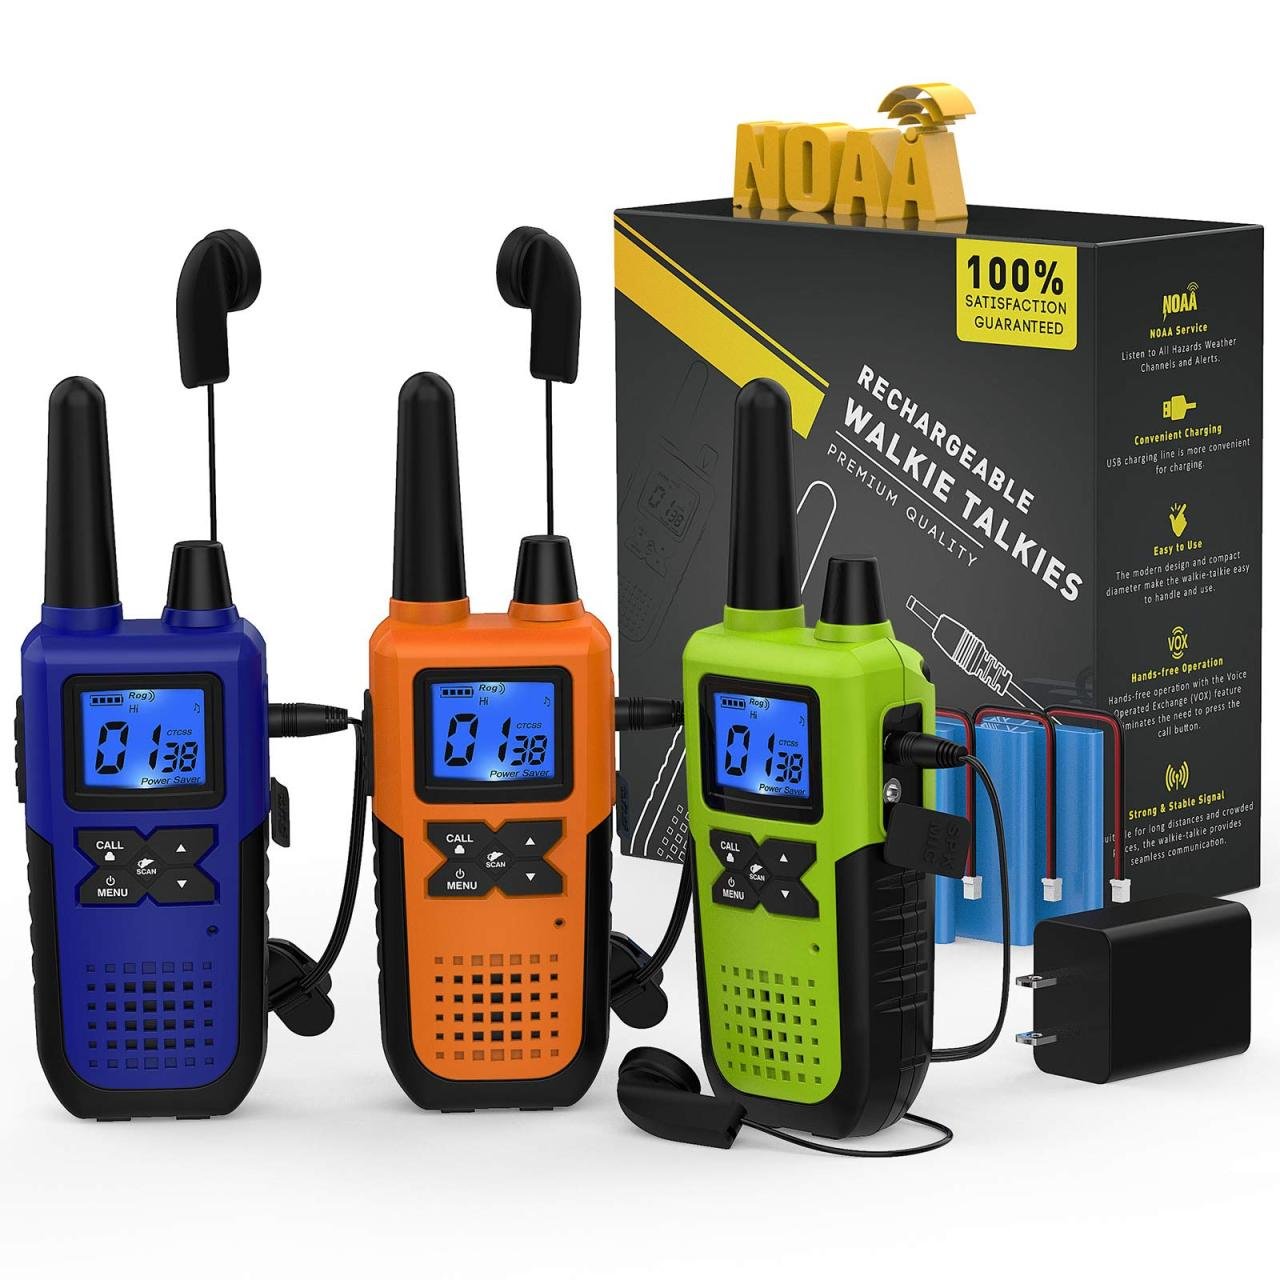 Walkie Talkies- Great for Many Uses